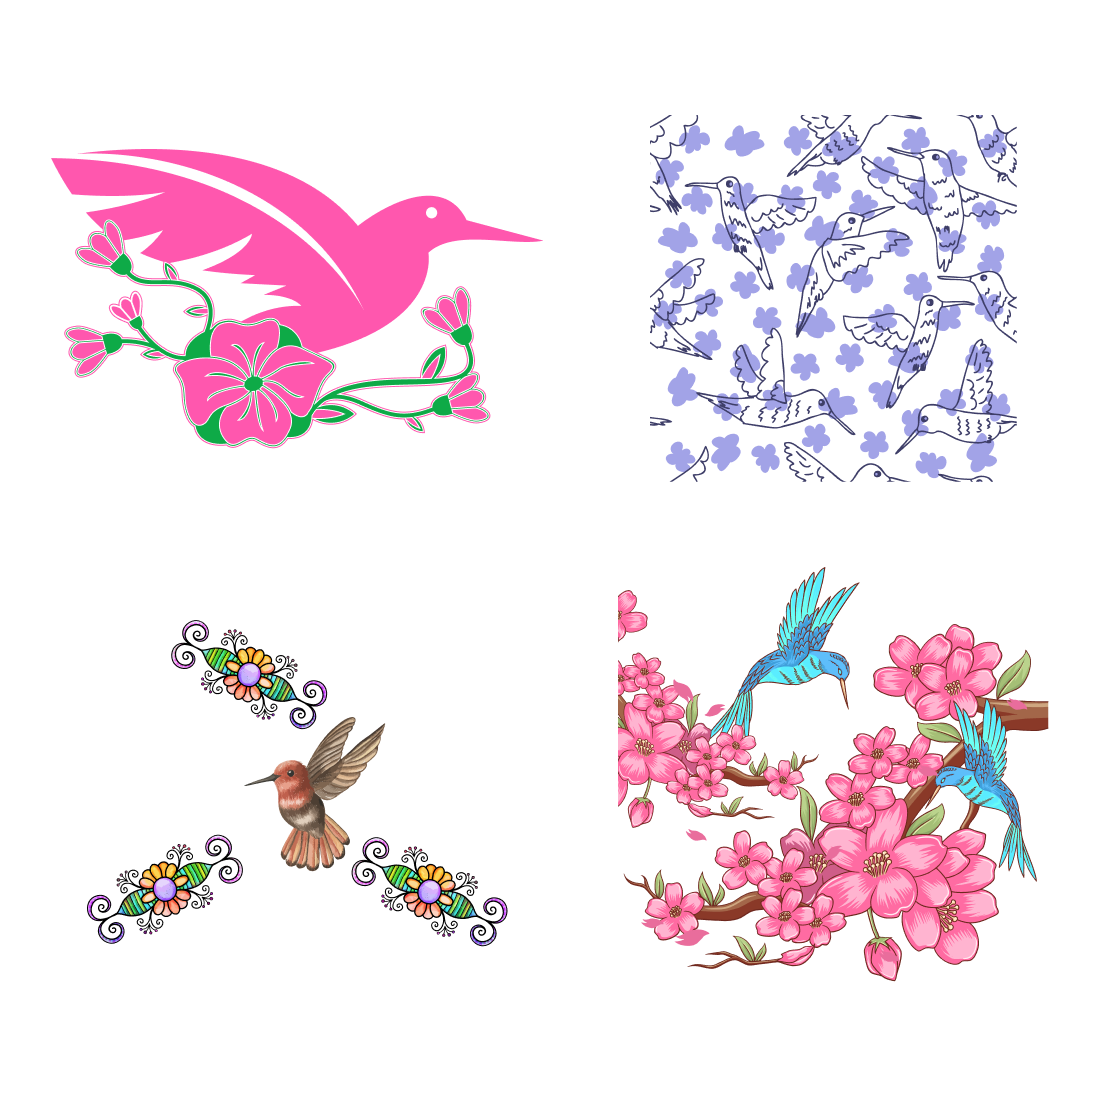 Picture of some birds and flowers on a white background.